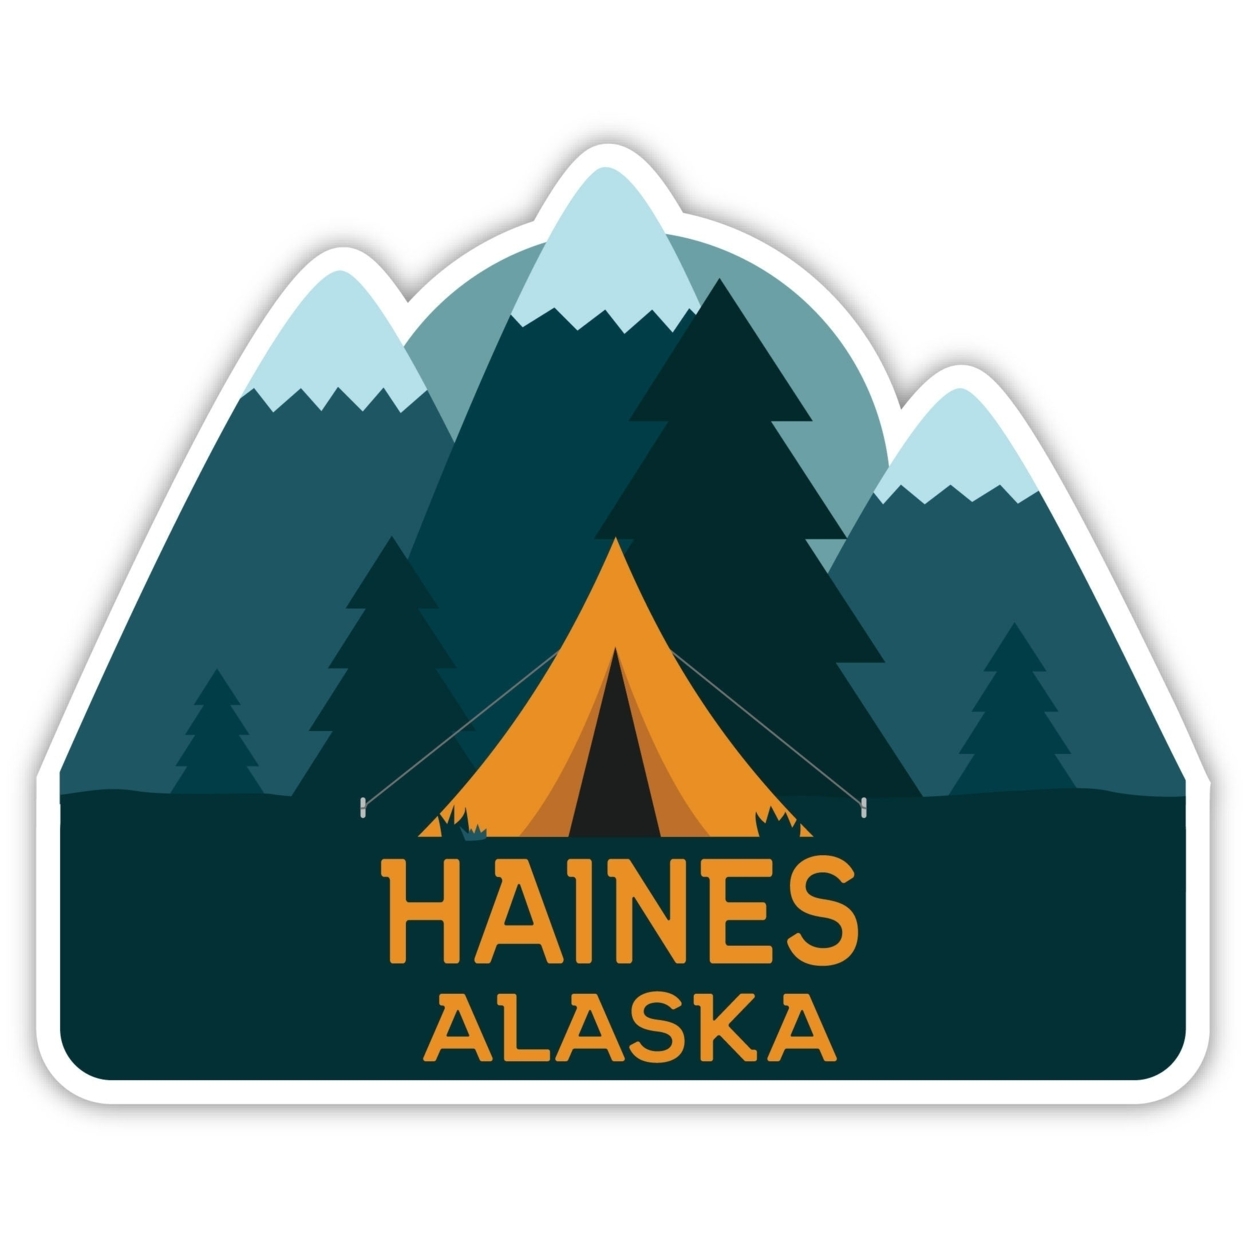 Haines Alaska Souvenir Decorative Stickers (Choose Theme And Size) - 4-Pack, 2-Inch, Tent